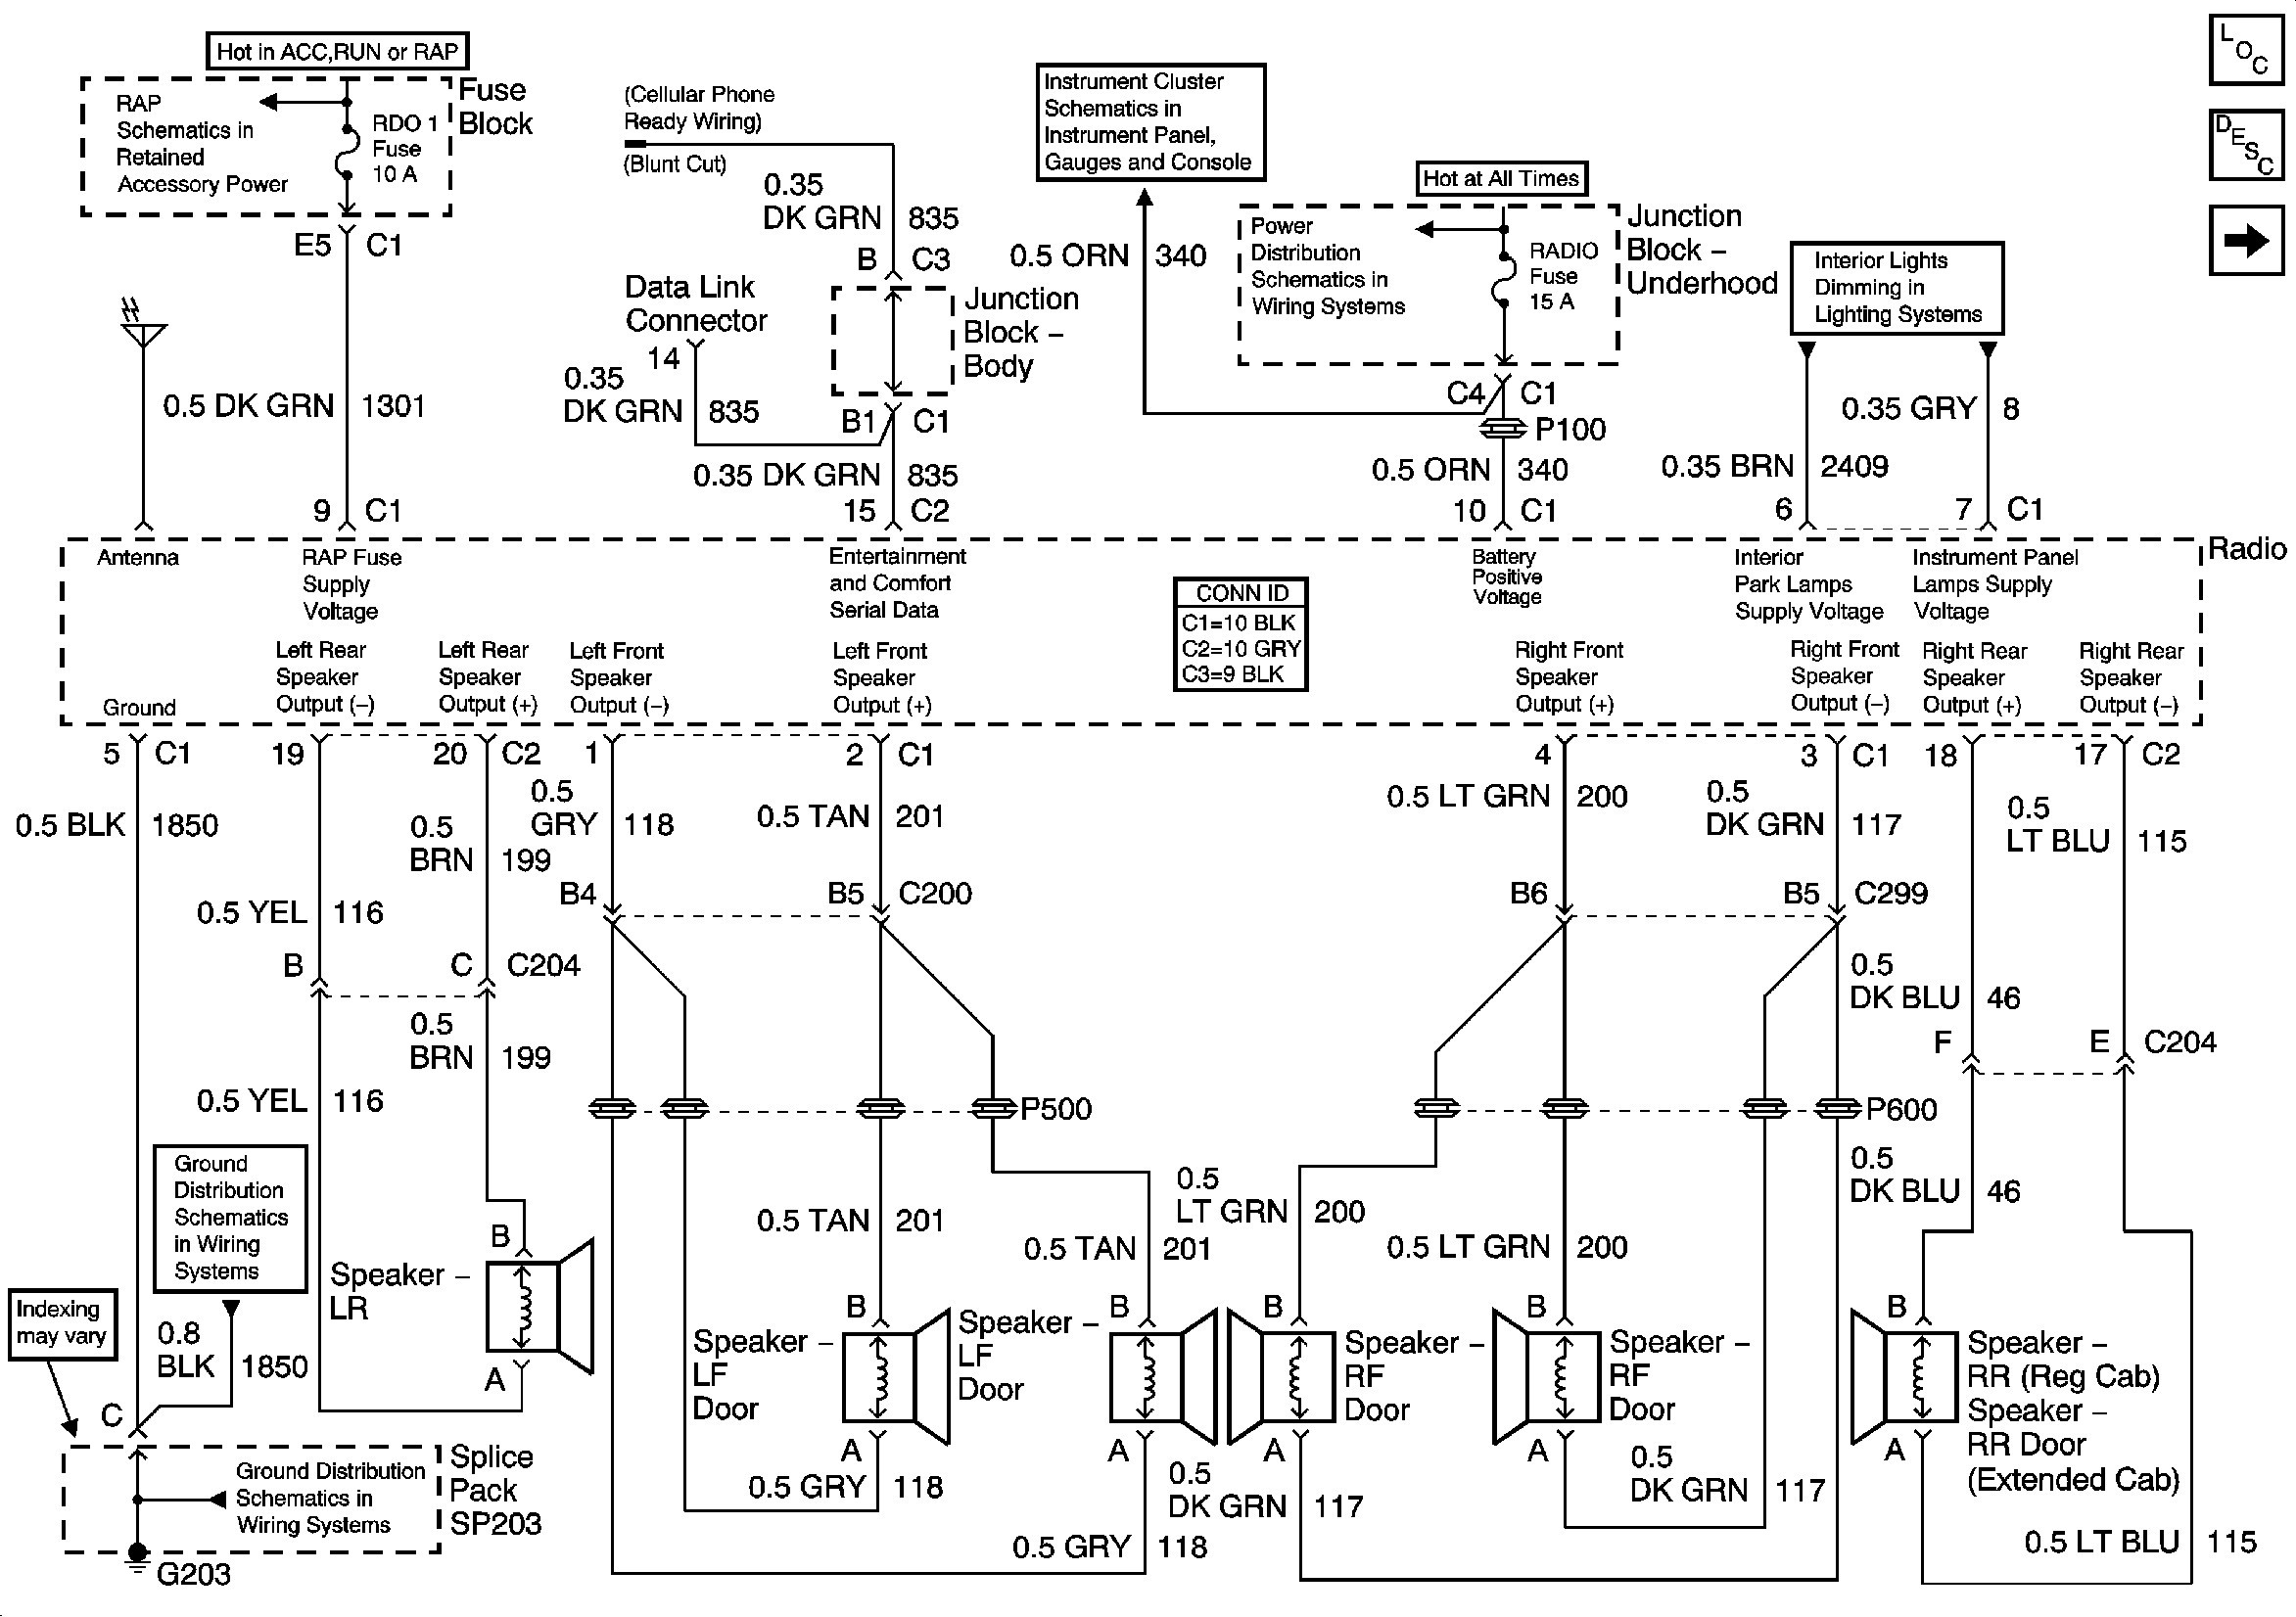 Chevy S10 Wiring Diagram Chevy S10 Wiring Harness Diagram Of Chevy S10 Wiring Diagram